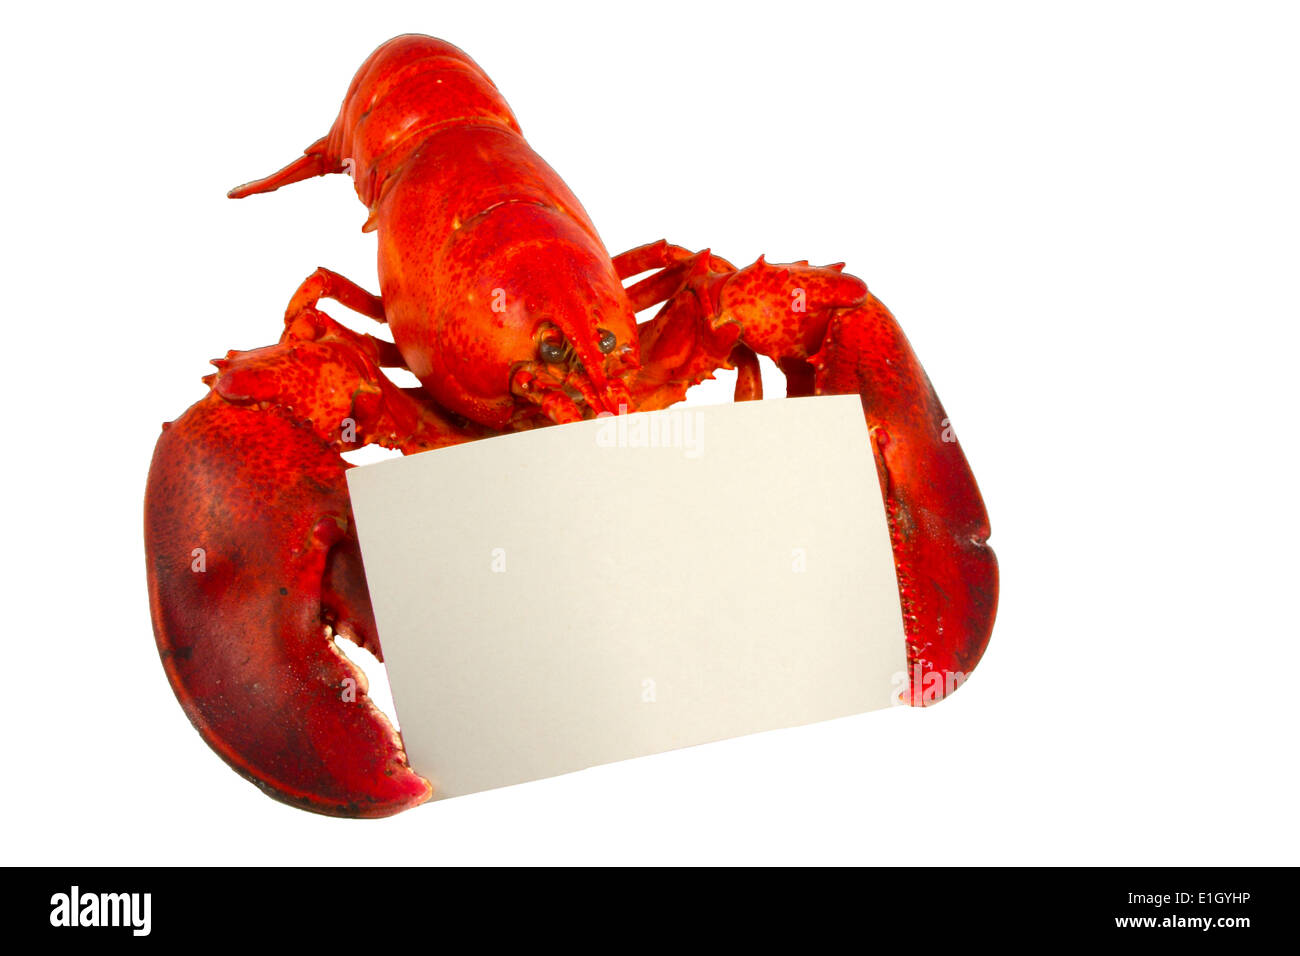 Homard entier holding a blank fiche ou carte menu isolated on white Banque D'Images